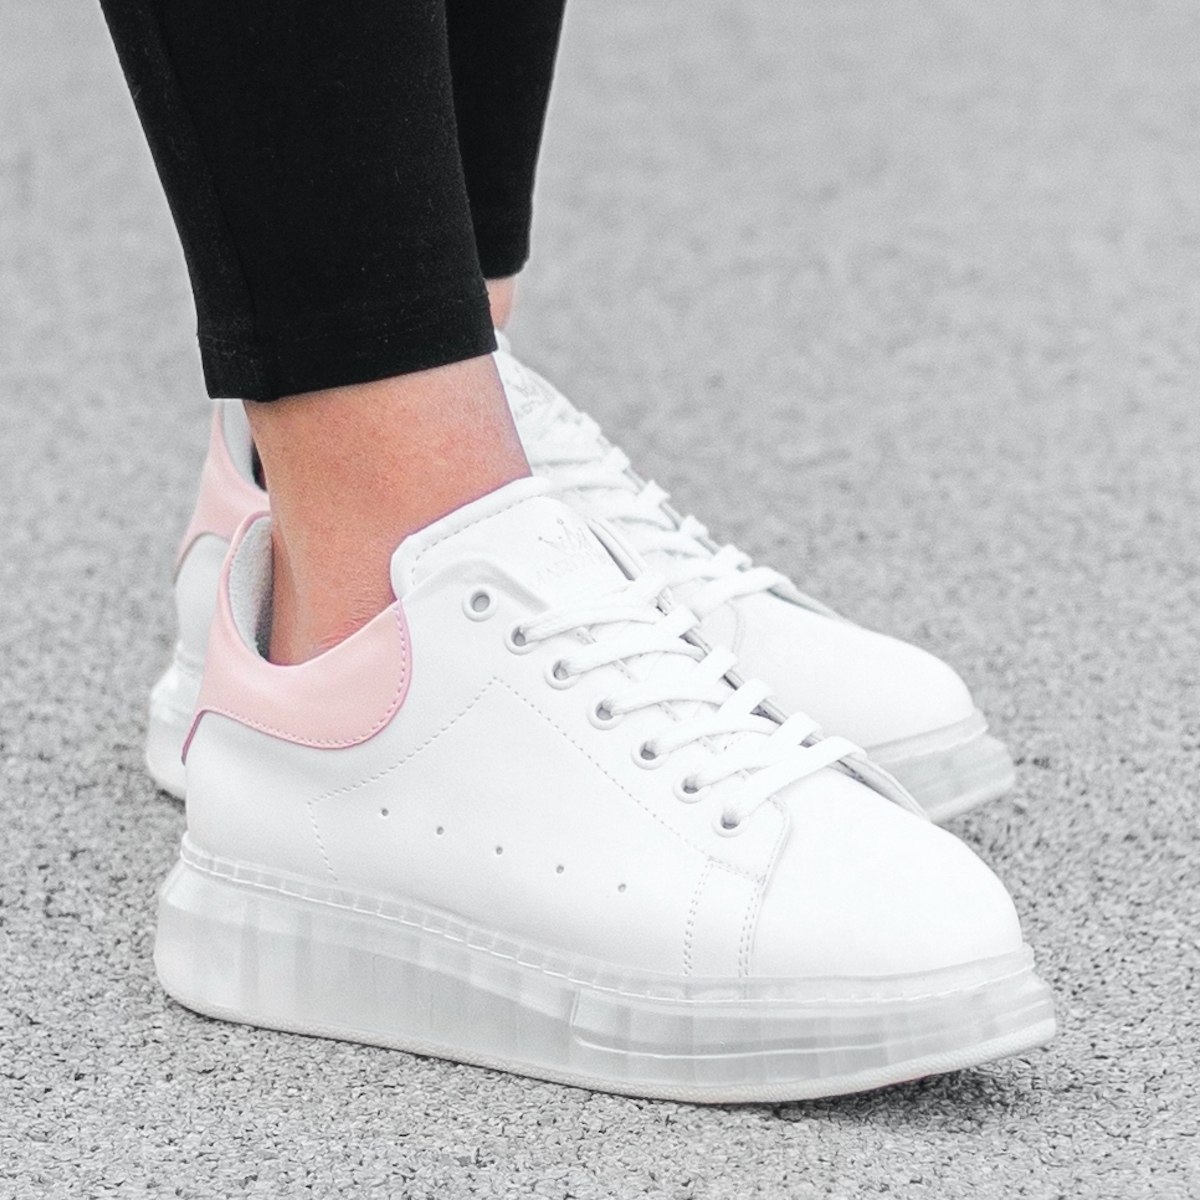 Women's O2 Transparent Hype Sole Sneakers In White-Pink - 1